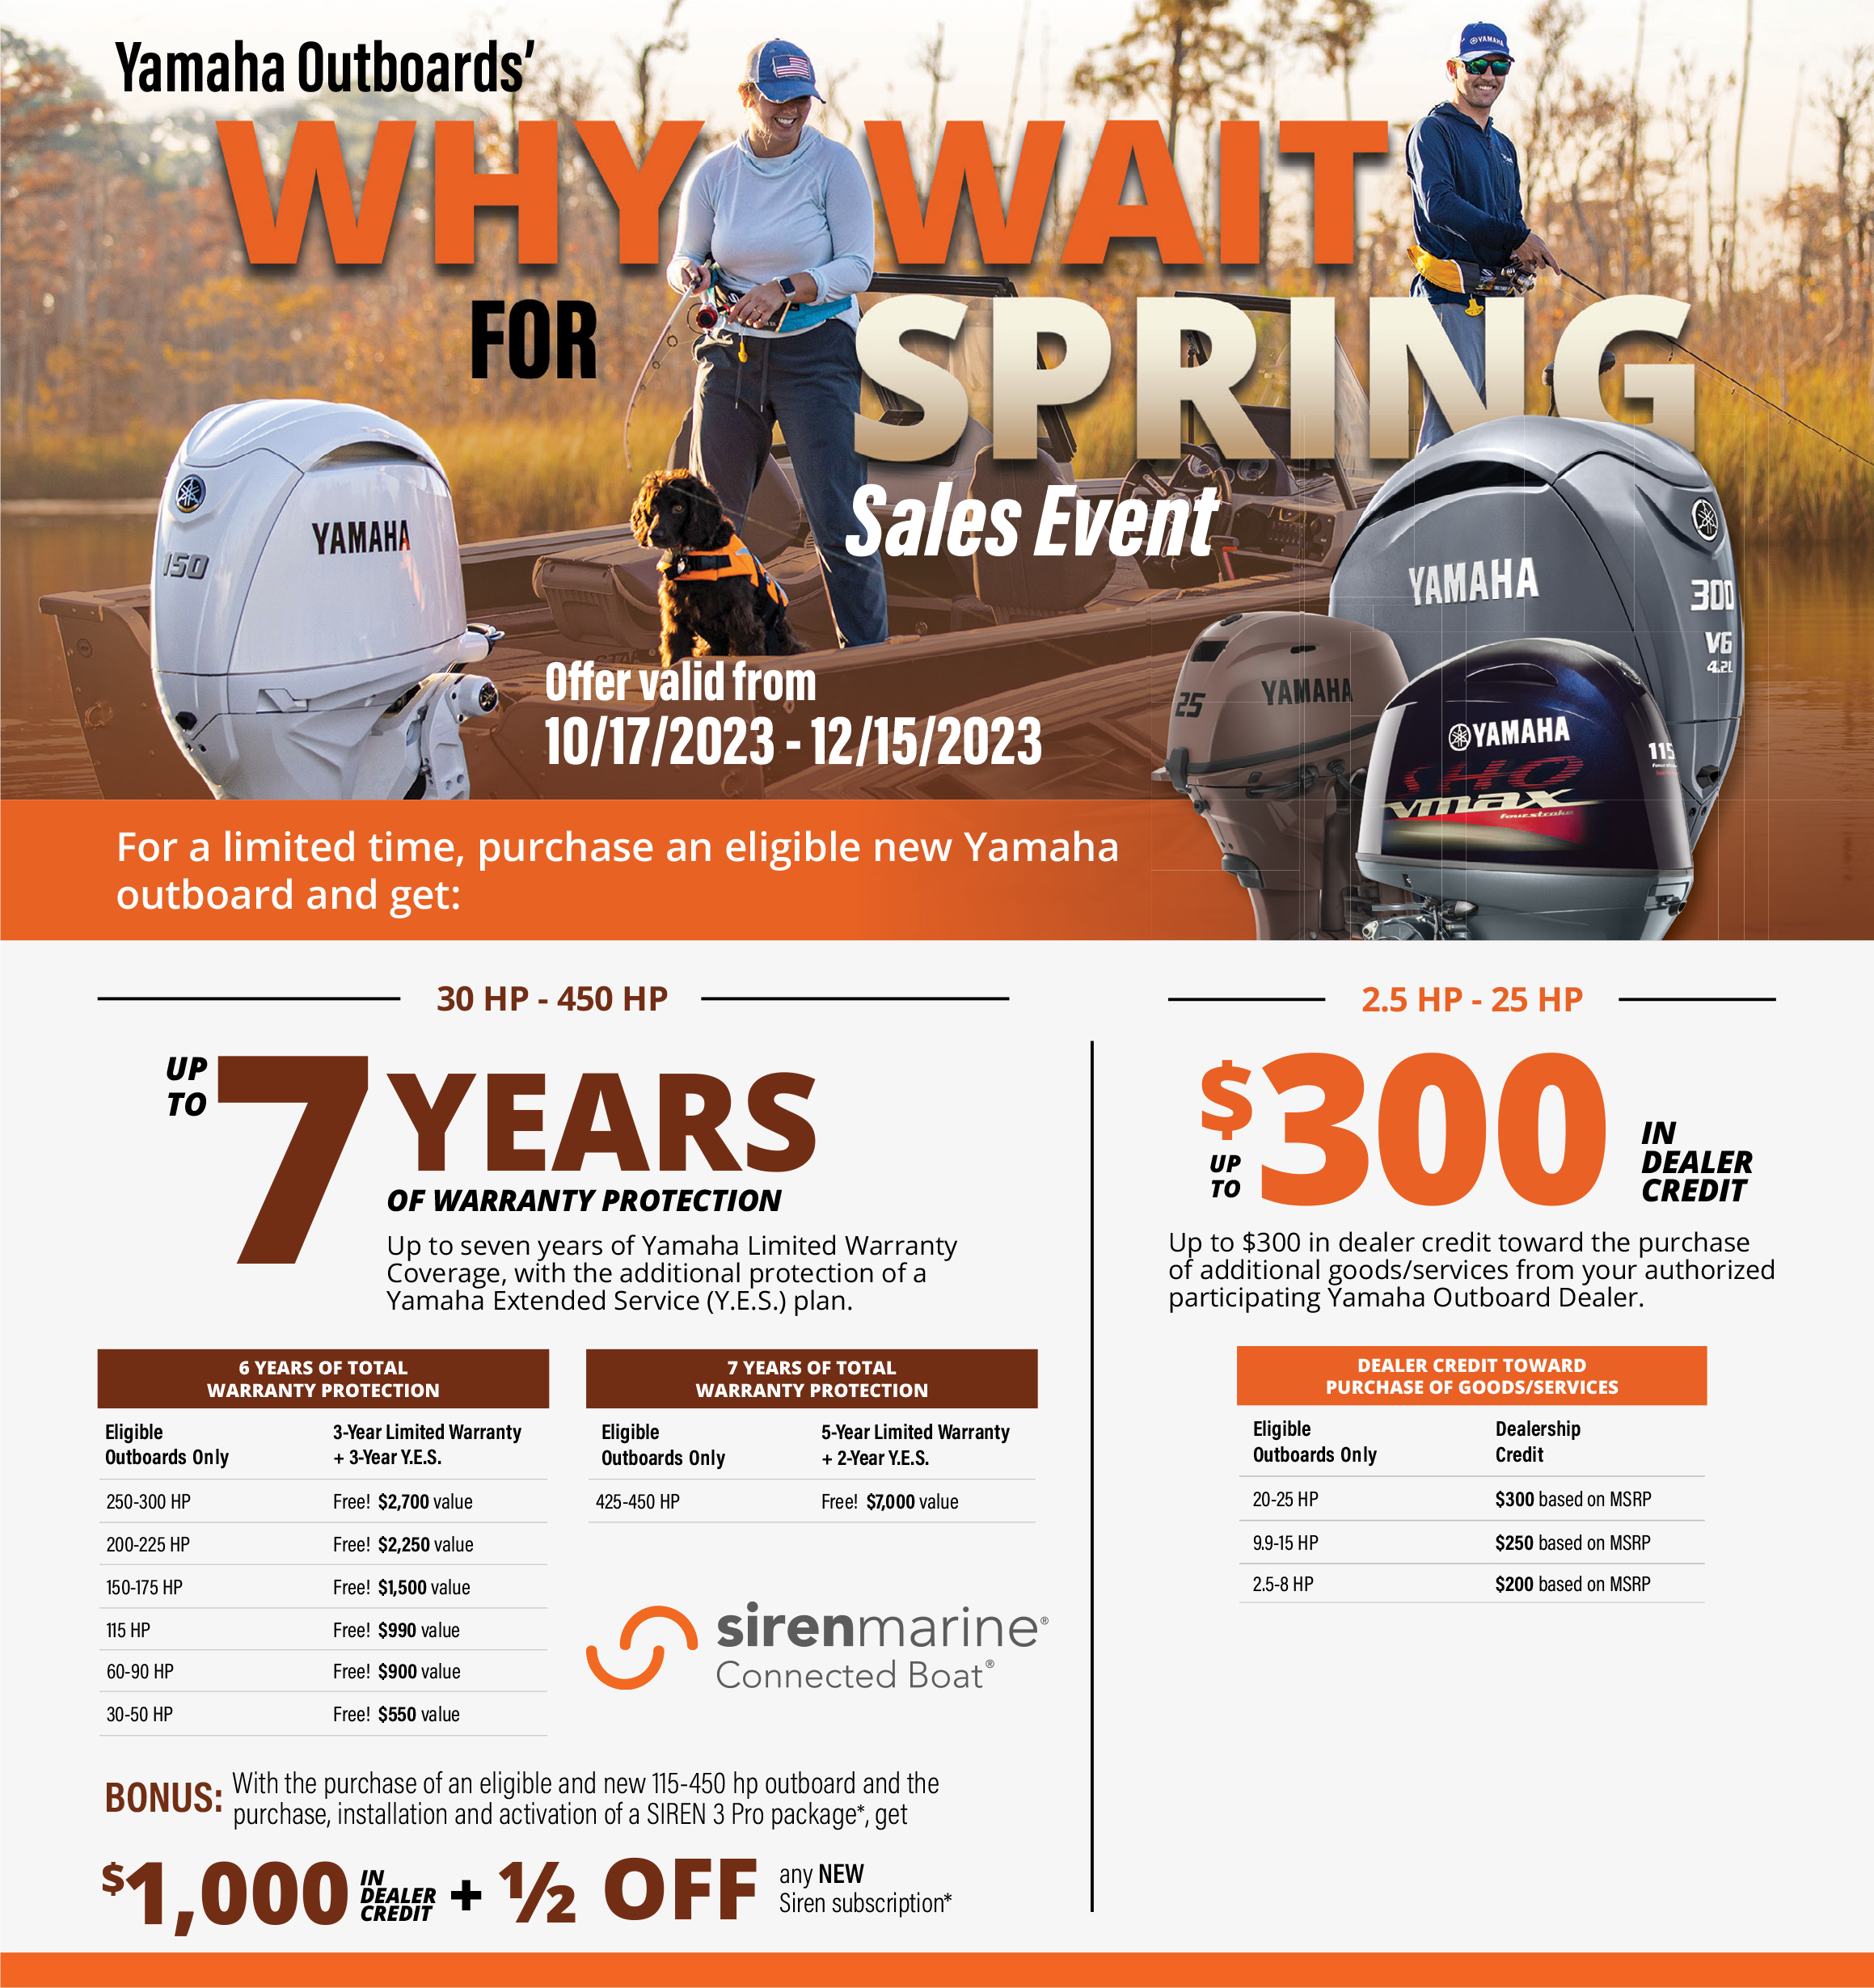 Yamaha Outboards “Why Wait for Spring” Sales Event Promotion